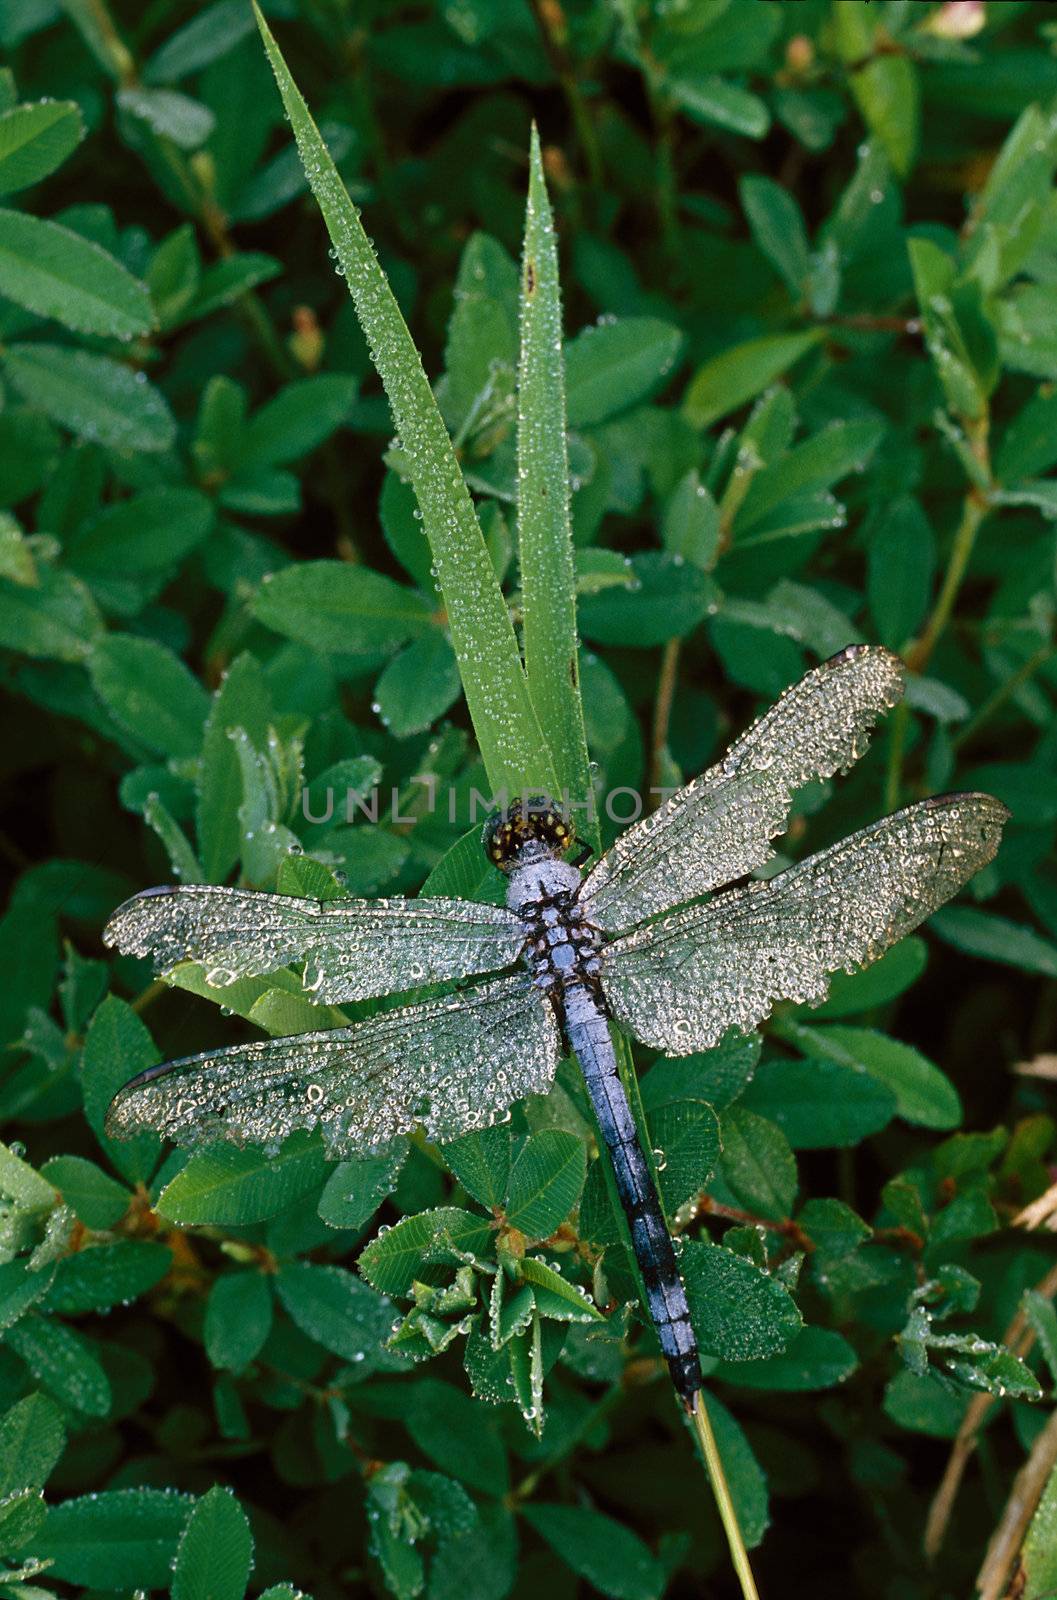 A blue dragonfly covered with dew on grassy stalks